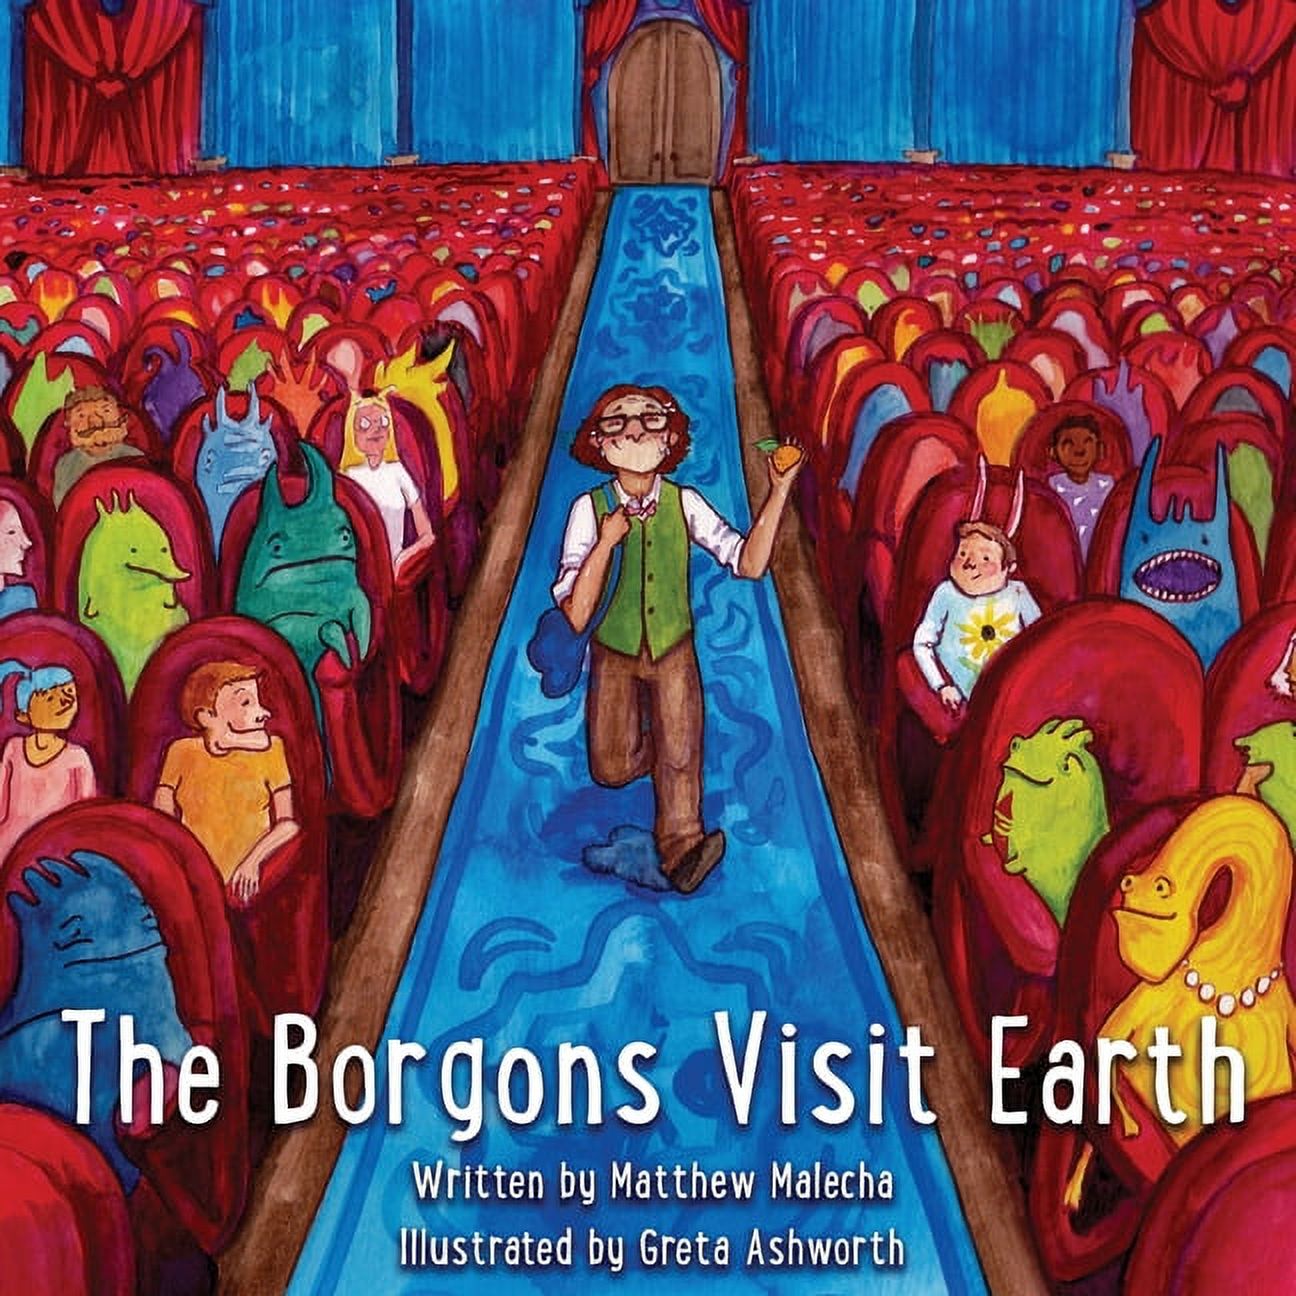 The Borgon: The Borgons Visit Earth (Series #1) (Paperback) - image 1 of 1